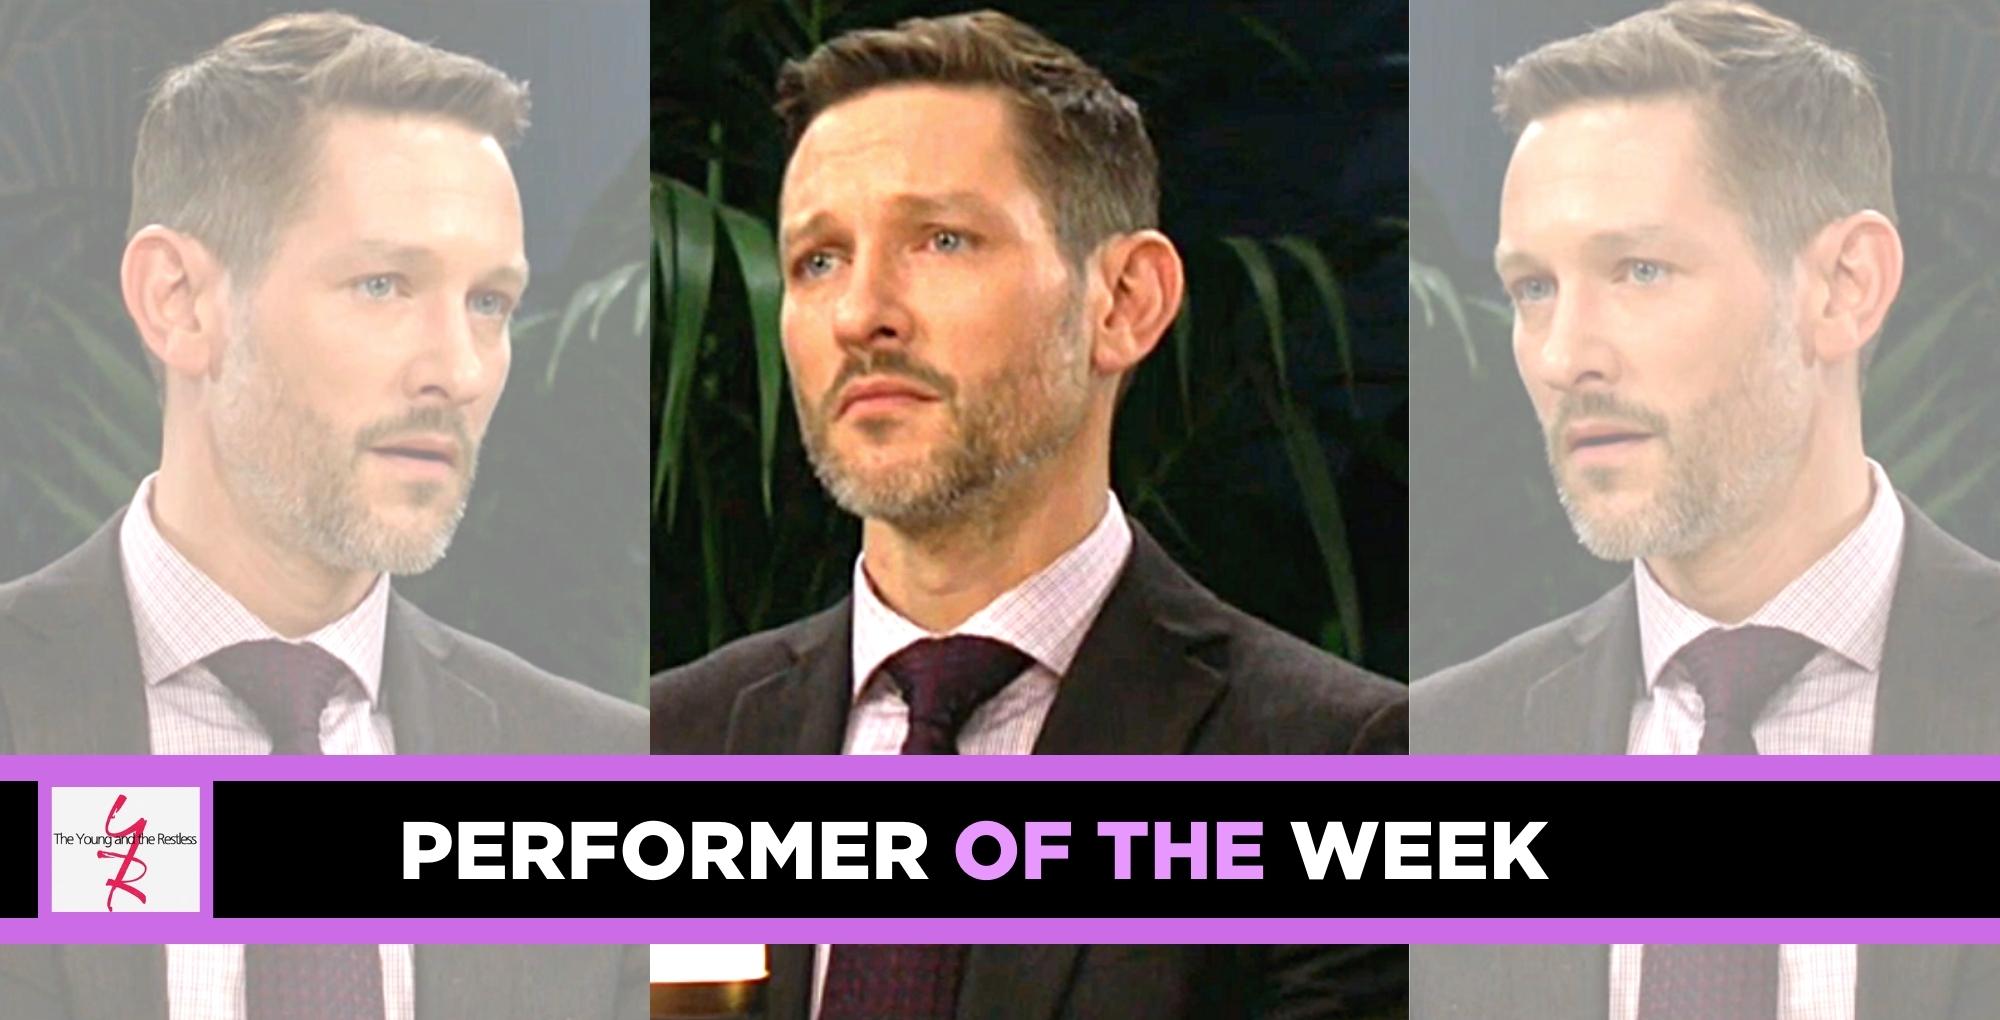 michael graziadei is y&r performer of the week for his performance as daniel romalotti.